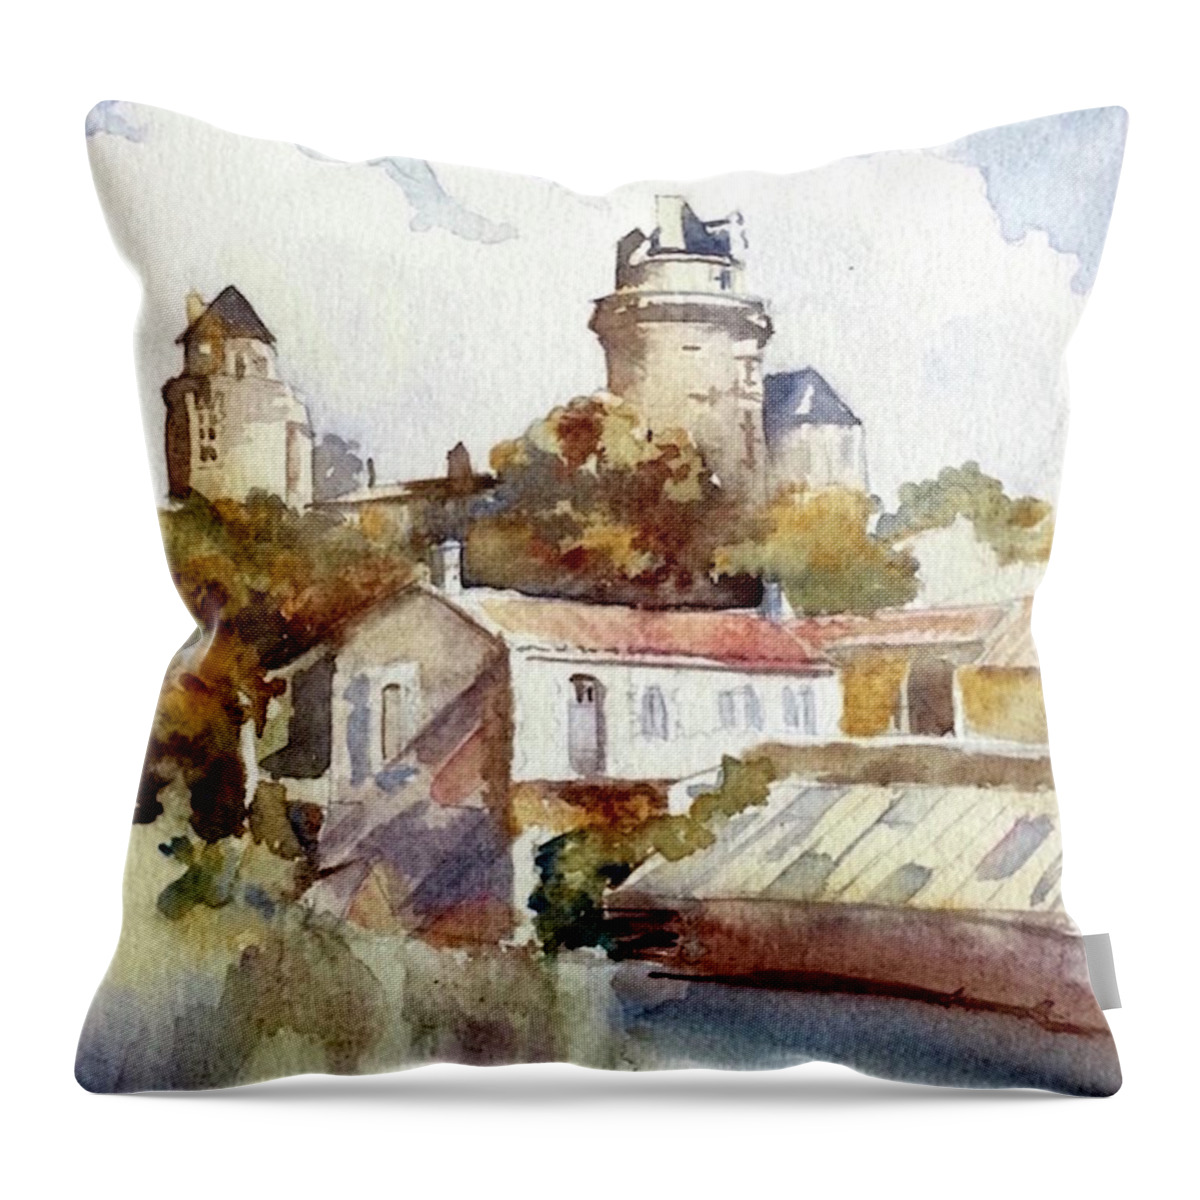 Chateau Throw Pillow featuring the painting Chateau Poitevin - France by Francoise Chauray